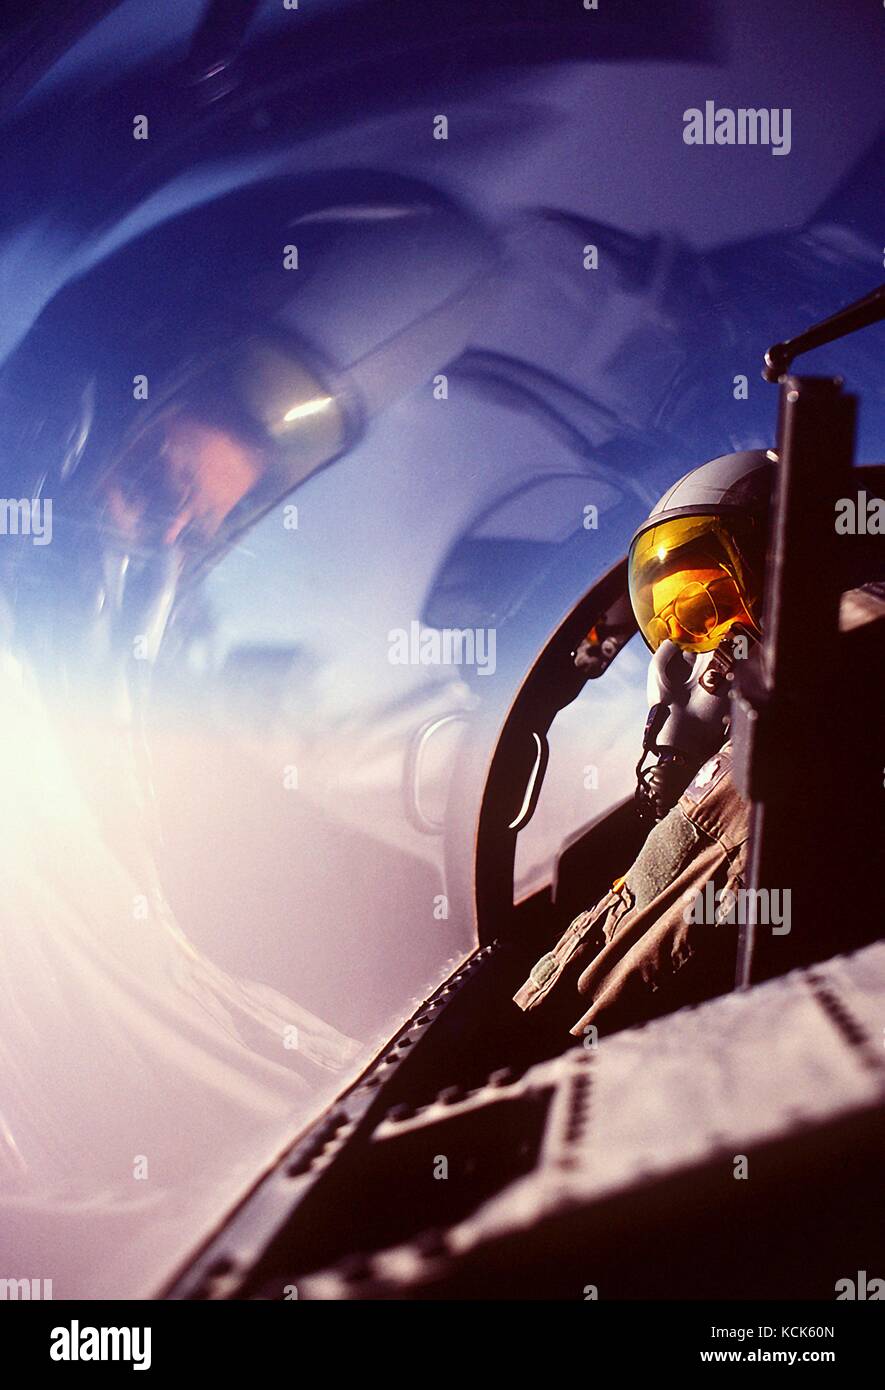 A U.S. Air Force pilot scans the horizon from the cockpit of a F-15D Eagle tactical fighter aircraft while on a combat patrol near the Iraqi border during Operation Desert Shield February 24, 1992 in Saudi Arabia.  (photo by Don Sutherland  via Planetpix) Stock Photo